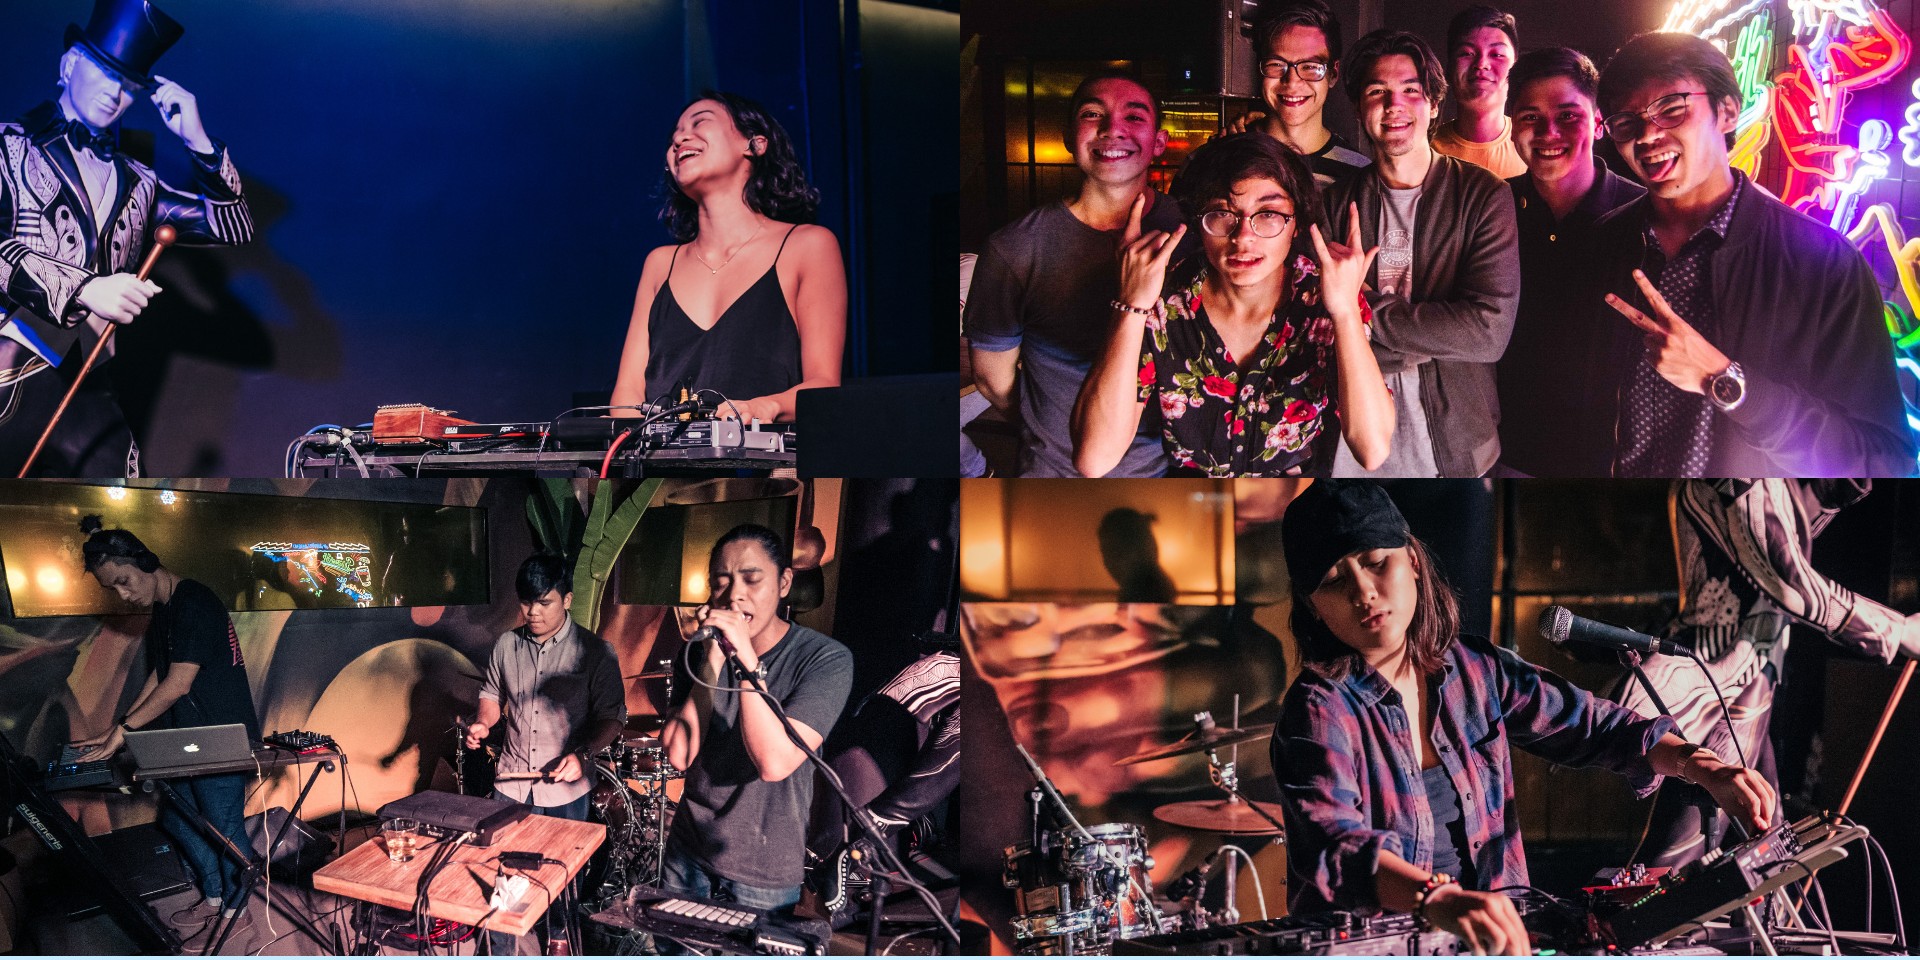 Catch your favorite music artists at this whiskey bar in Poblacion one last time this Thursday